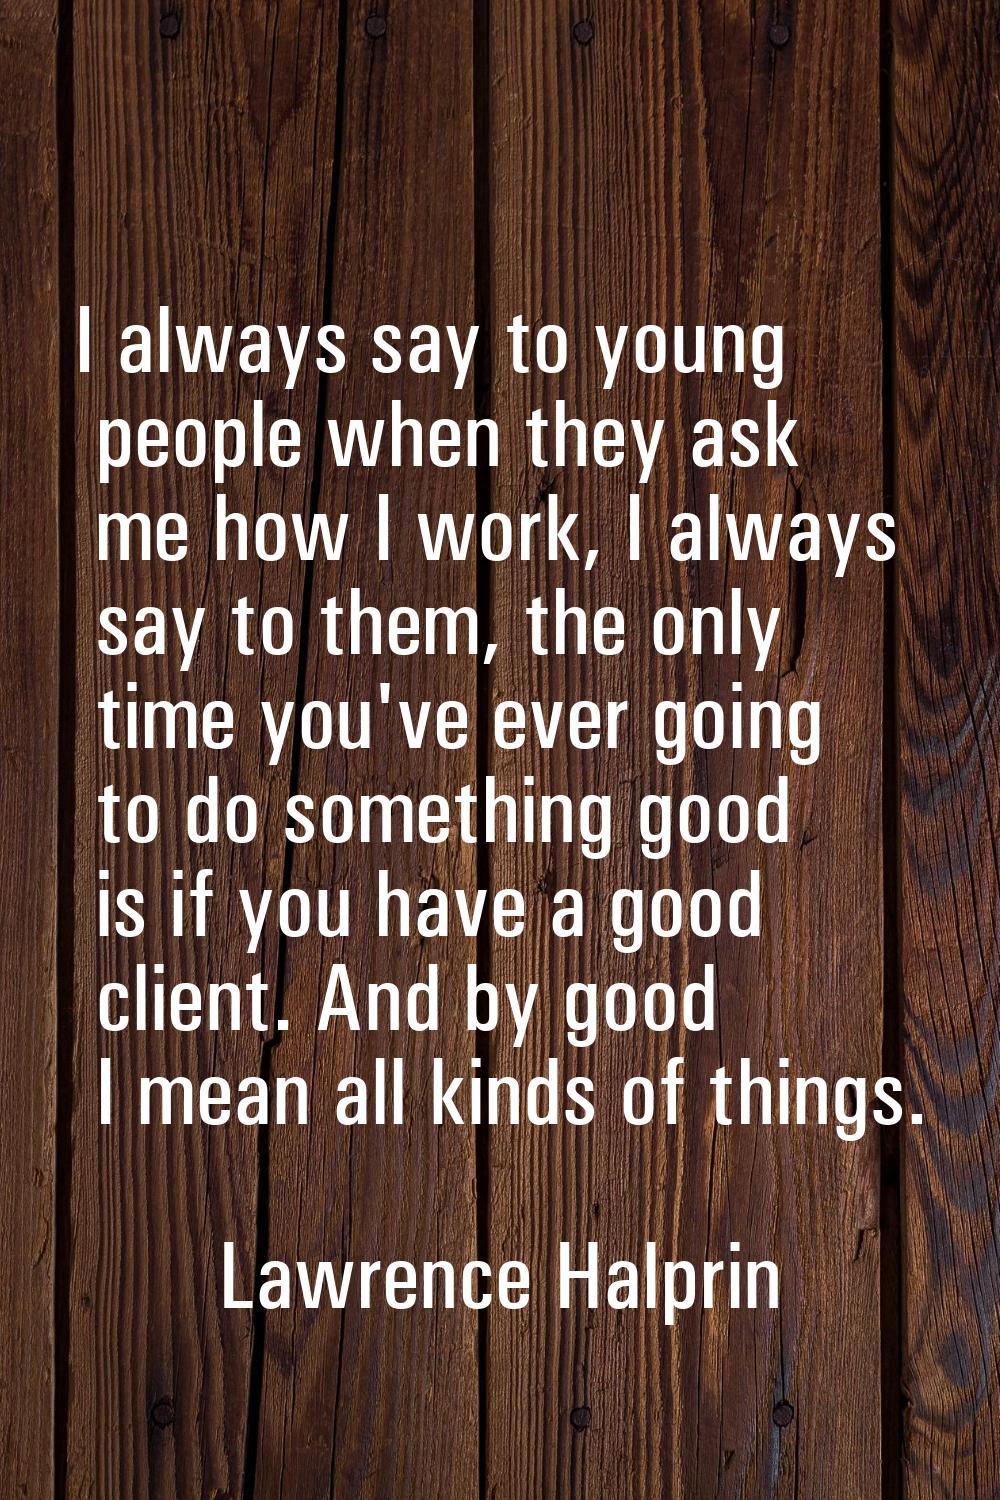 I always say to young people when they ask me how I work, I always say to them, the only time you'v